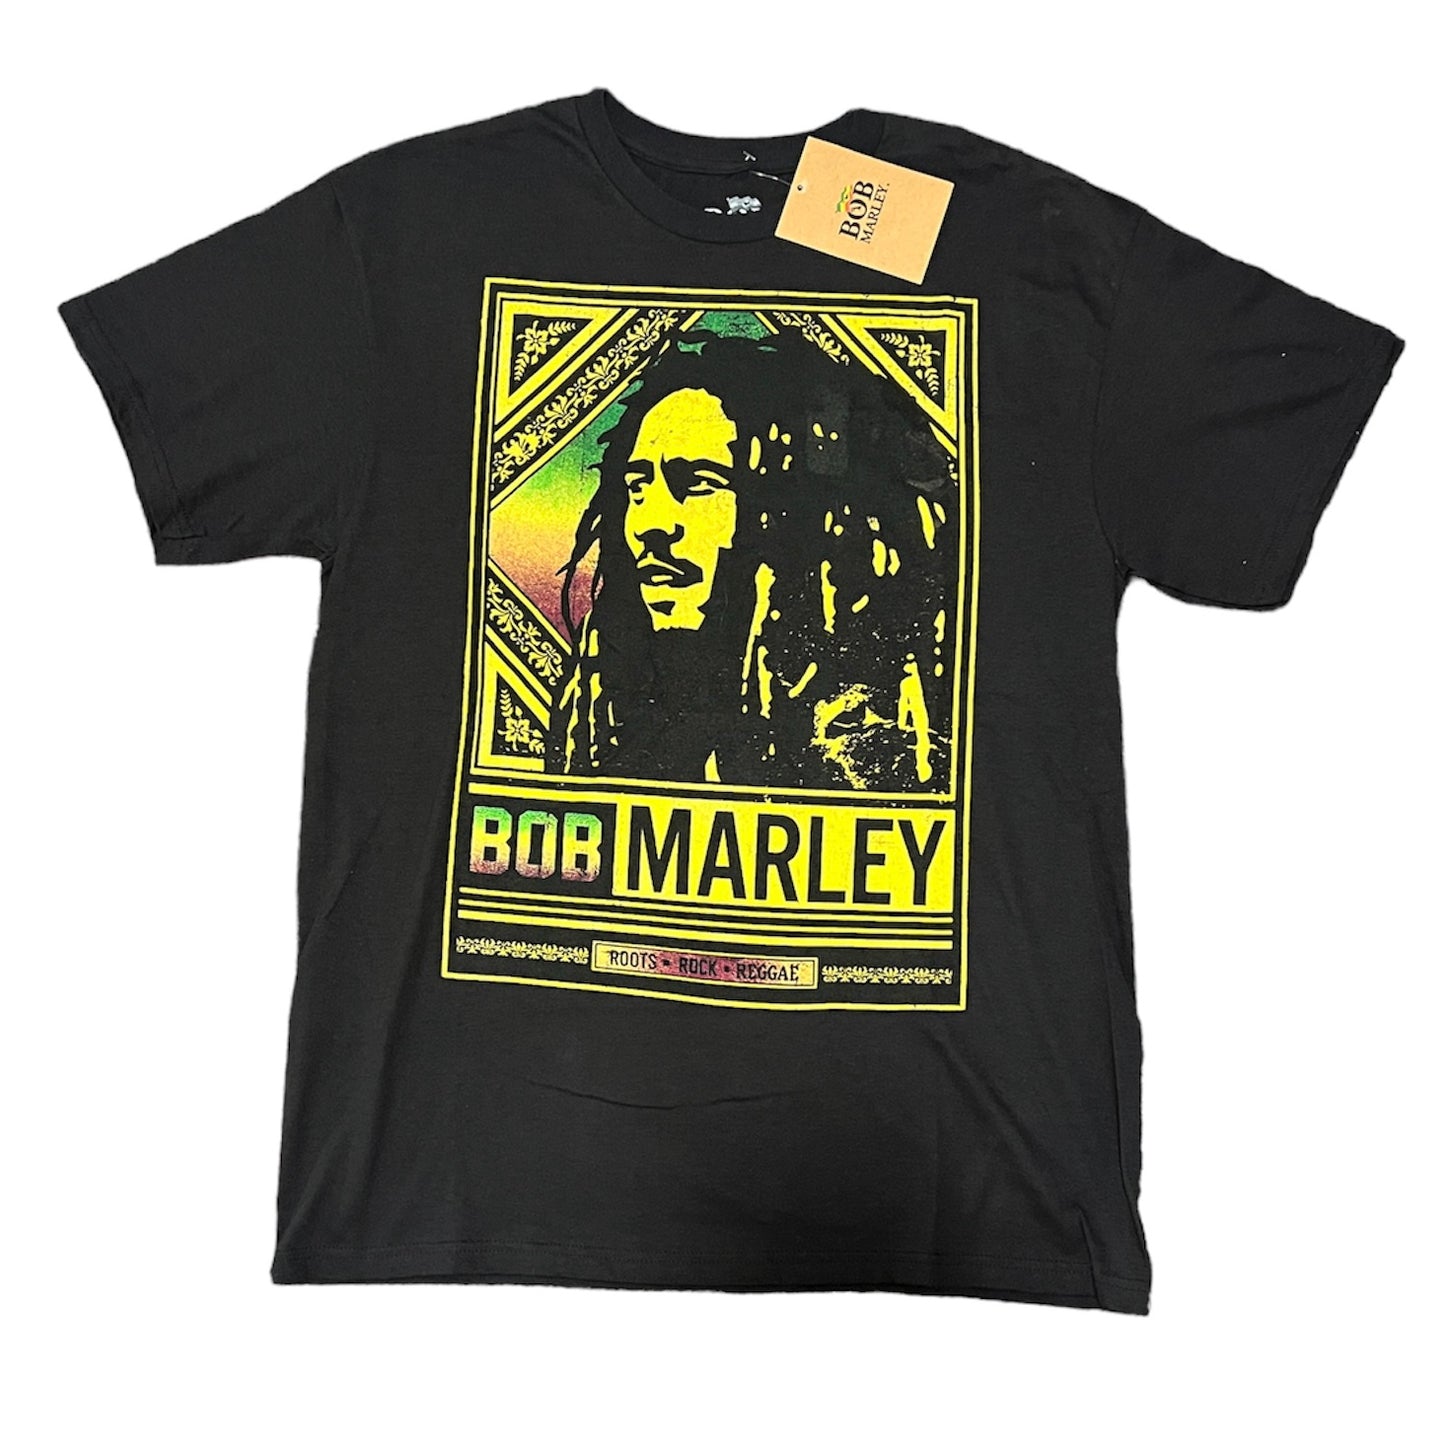 Bob Marley T-Shirt With Tag Size Large